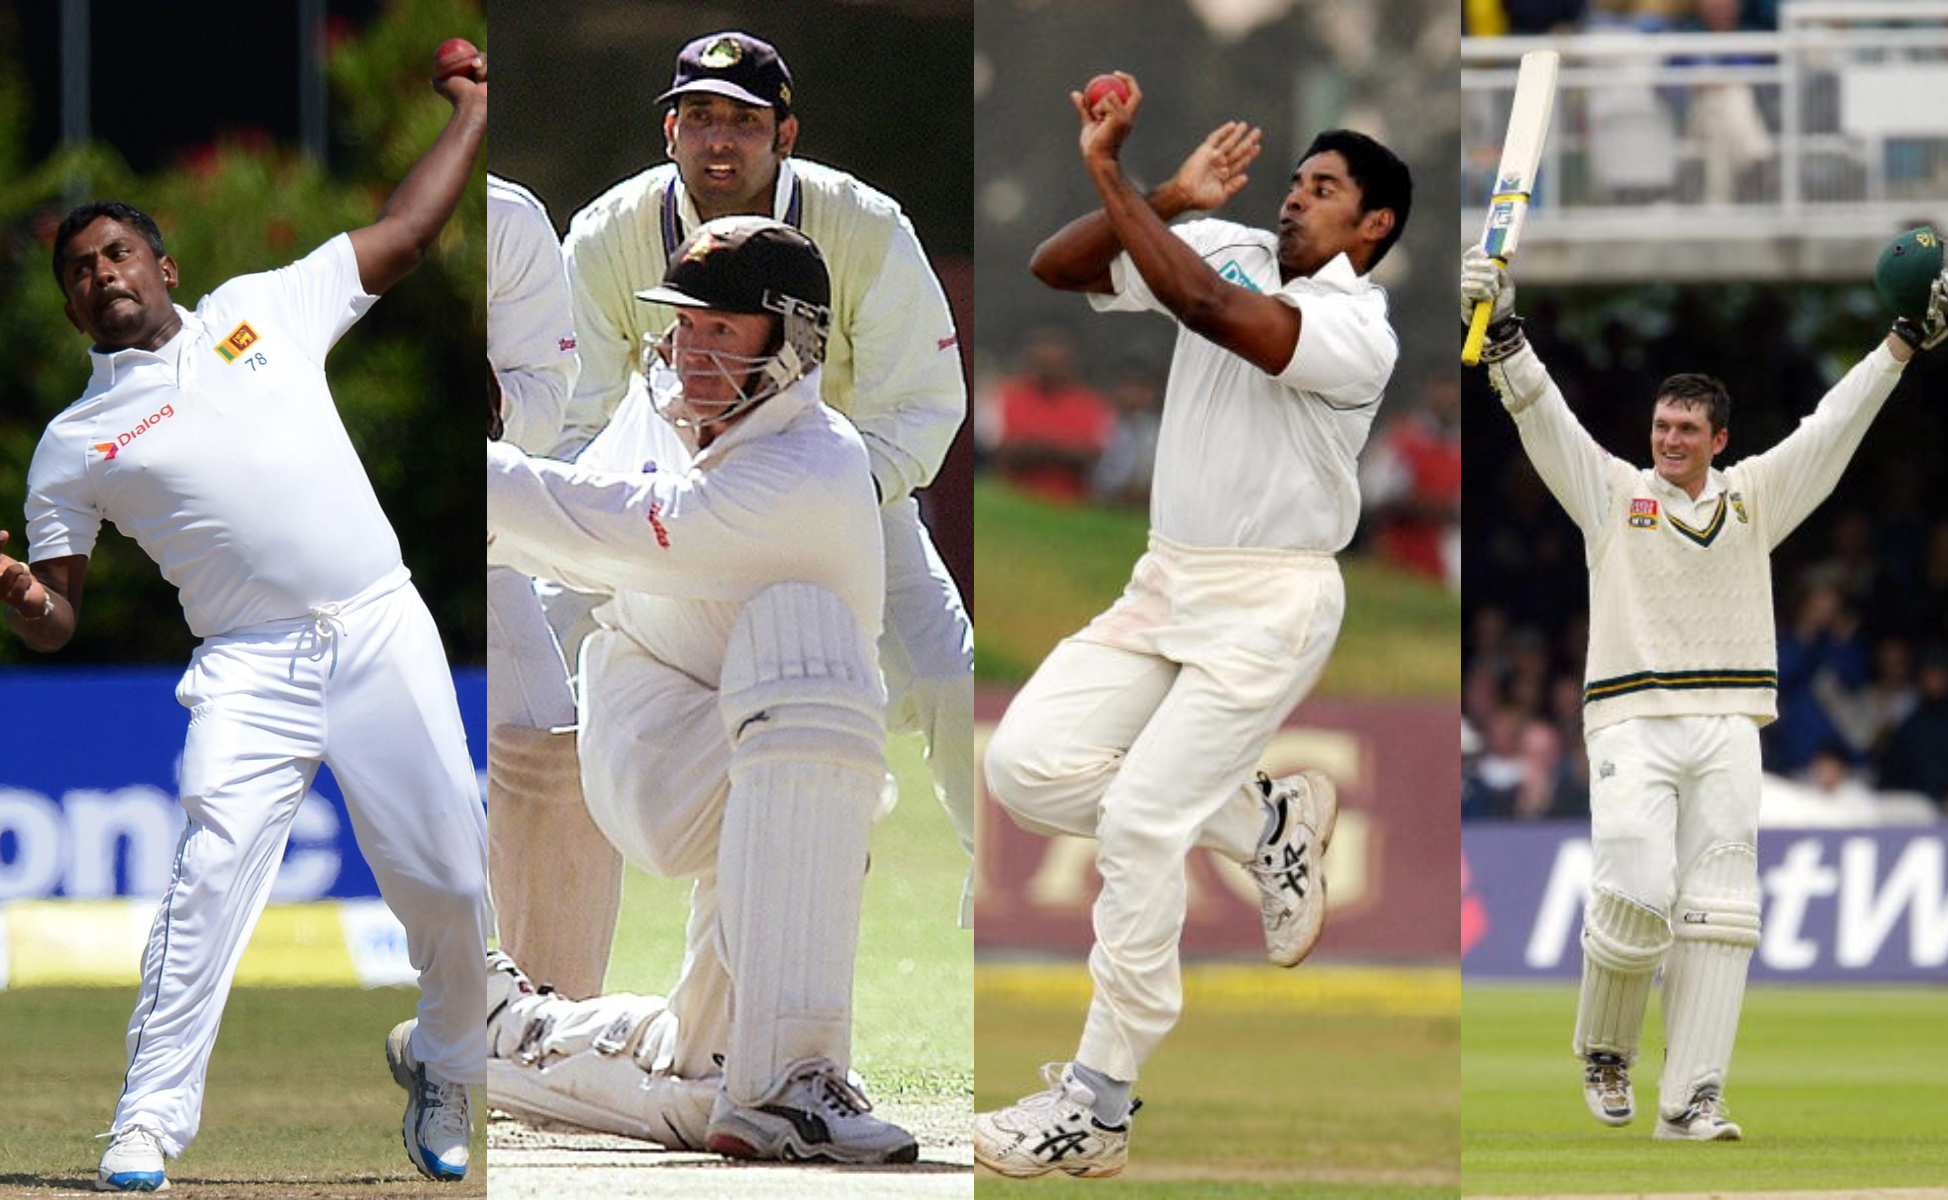 The Reserves - Rangana Herath, Chaminda Vaas, Andy Flower and Graeme Smith | Getty